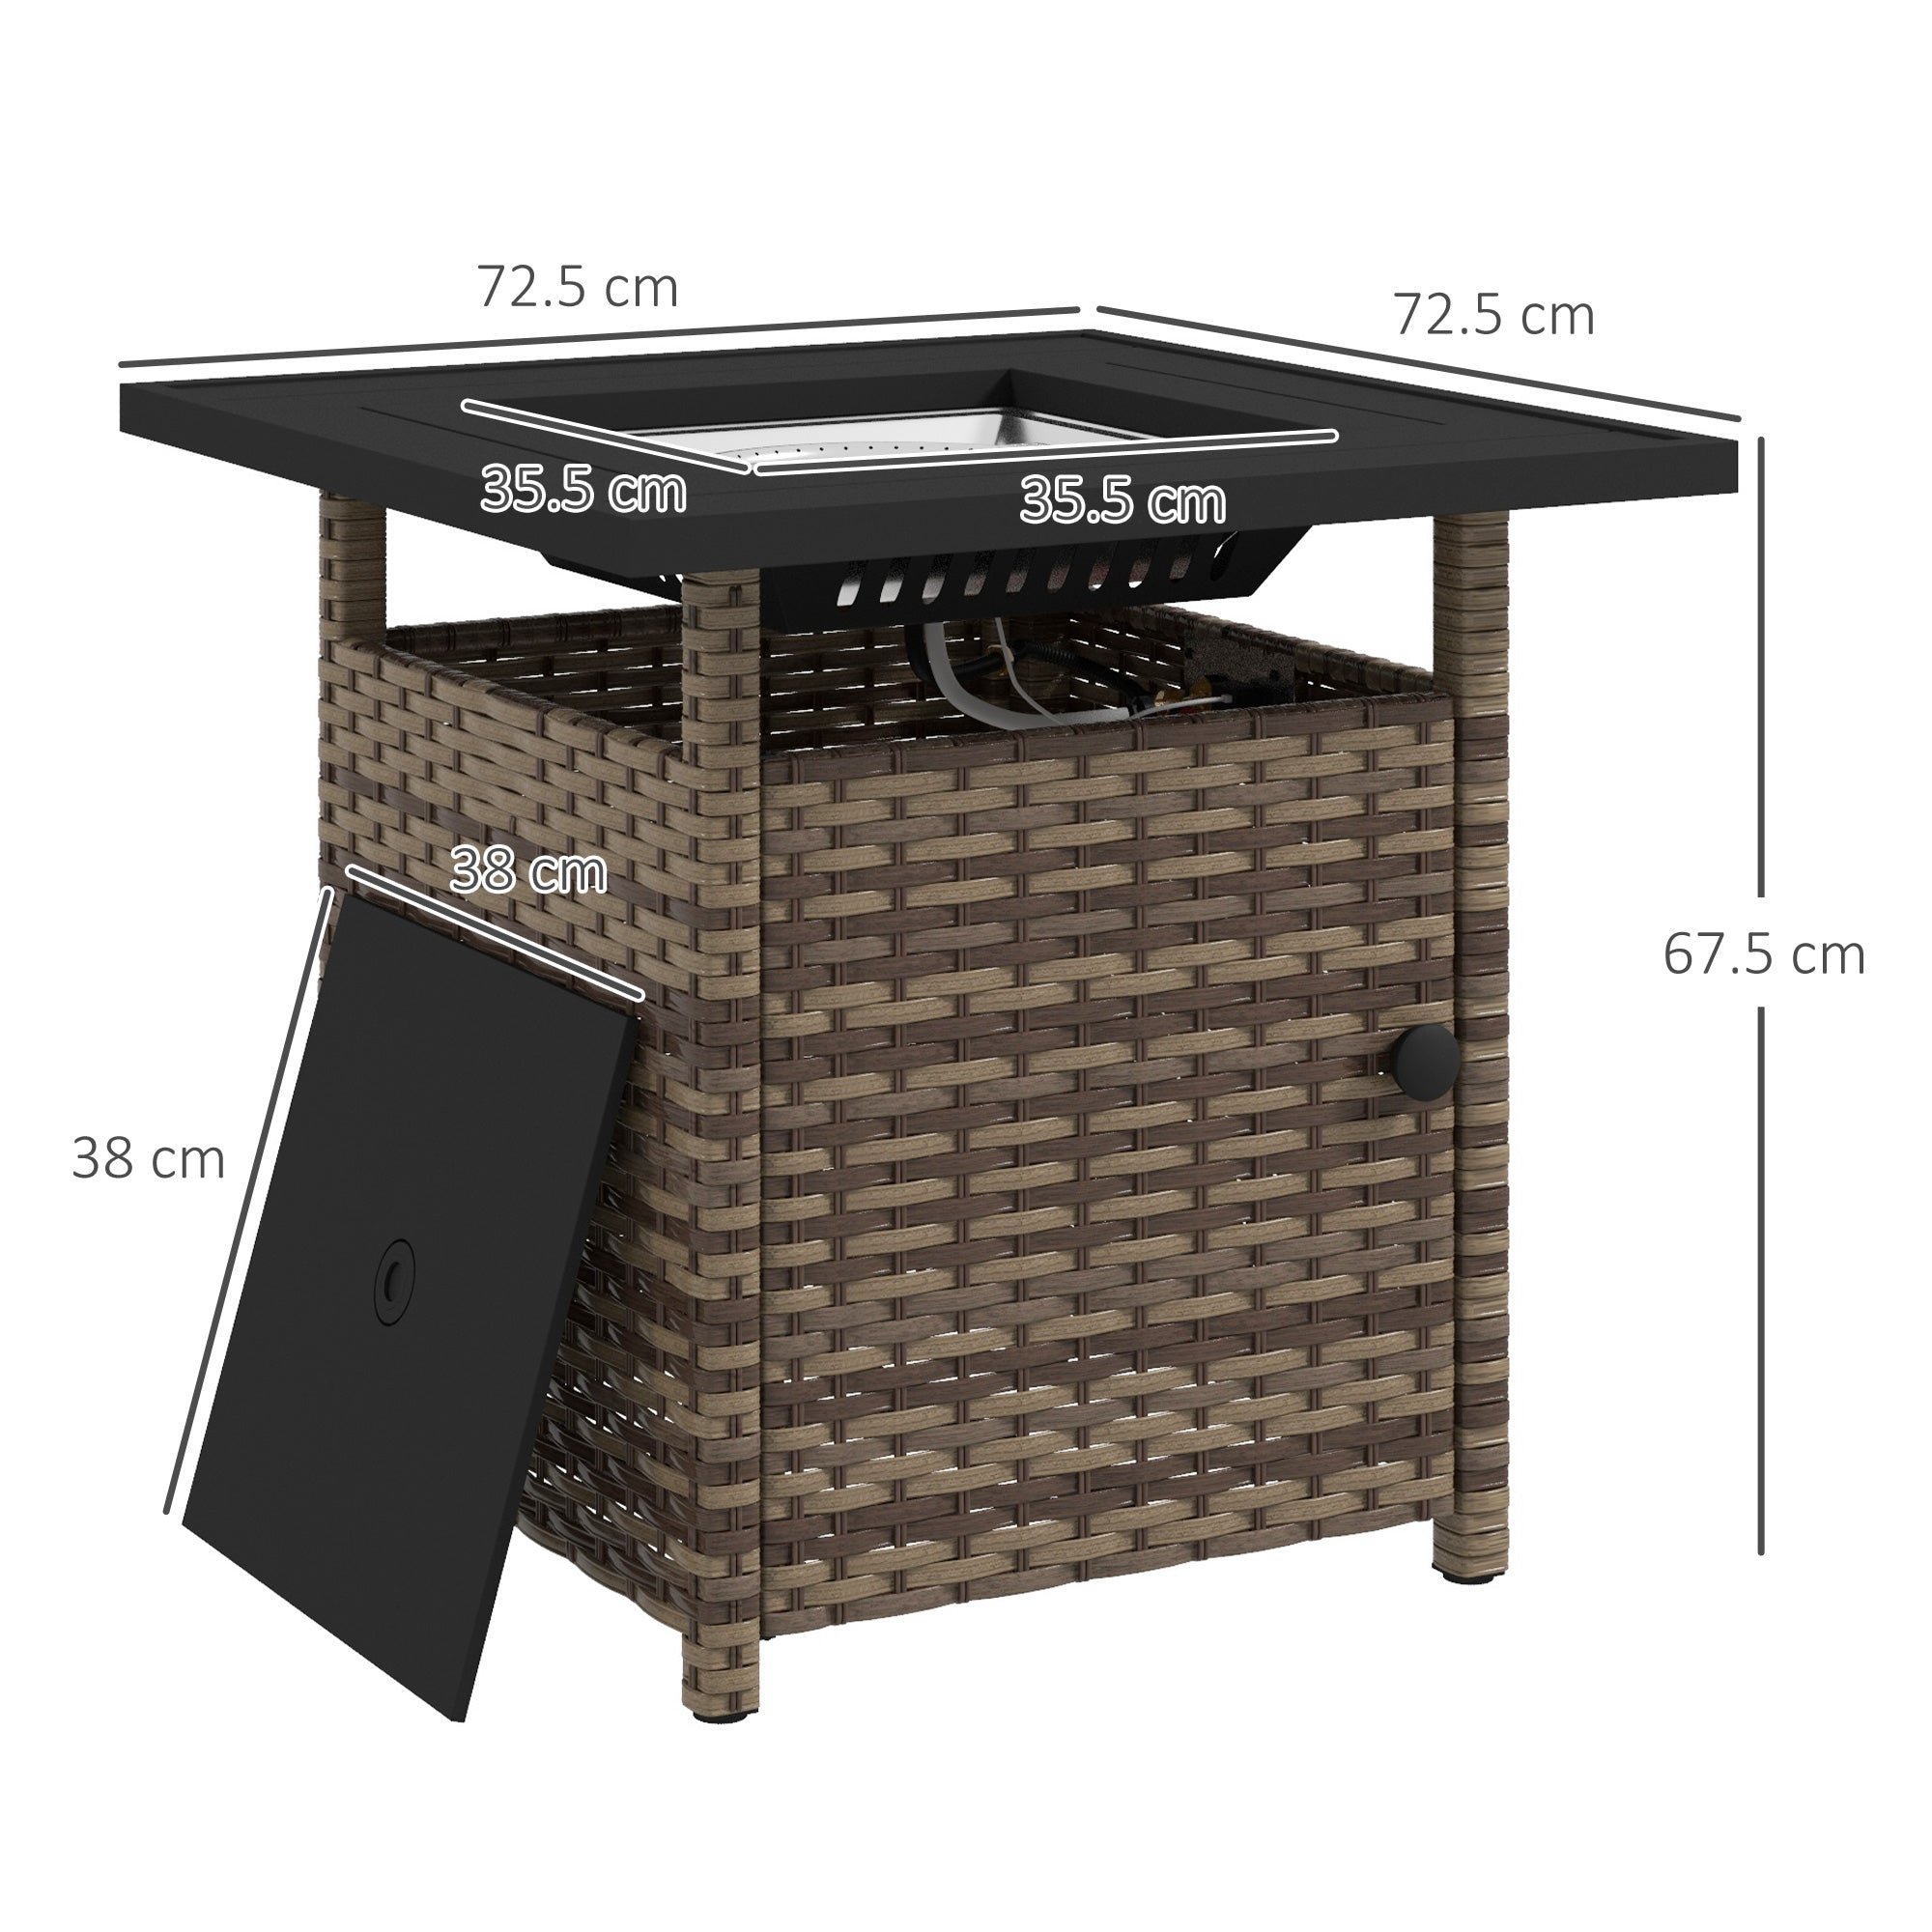 Outsunny 72.5 x 72.5cm 50,000 BTU Fire Pit Table, with Cover - Brown